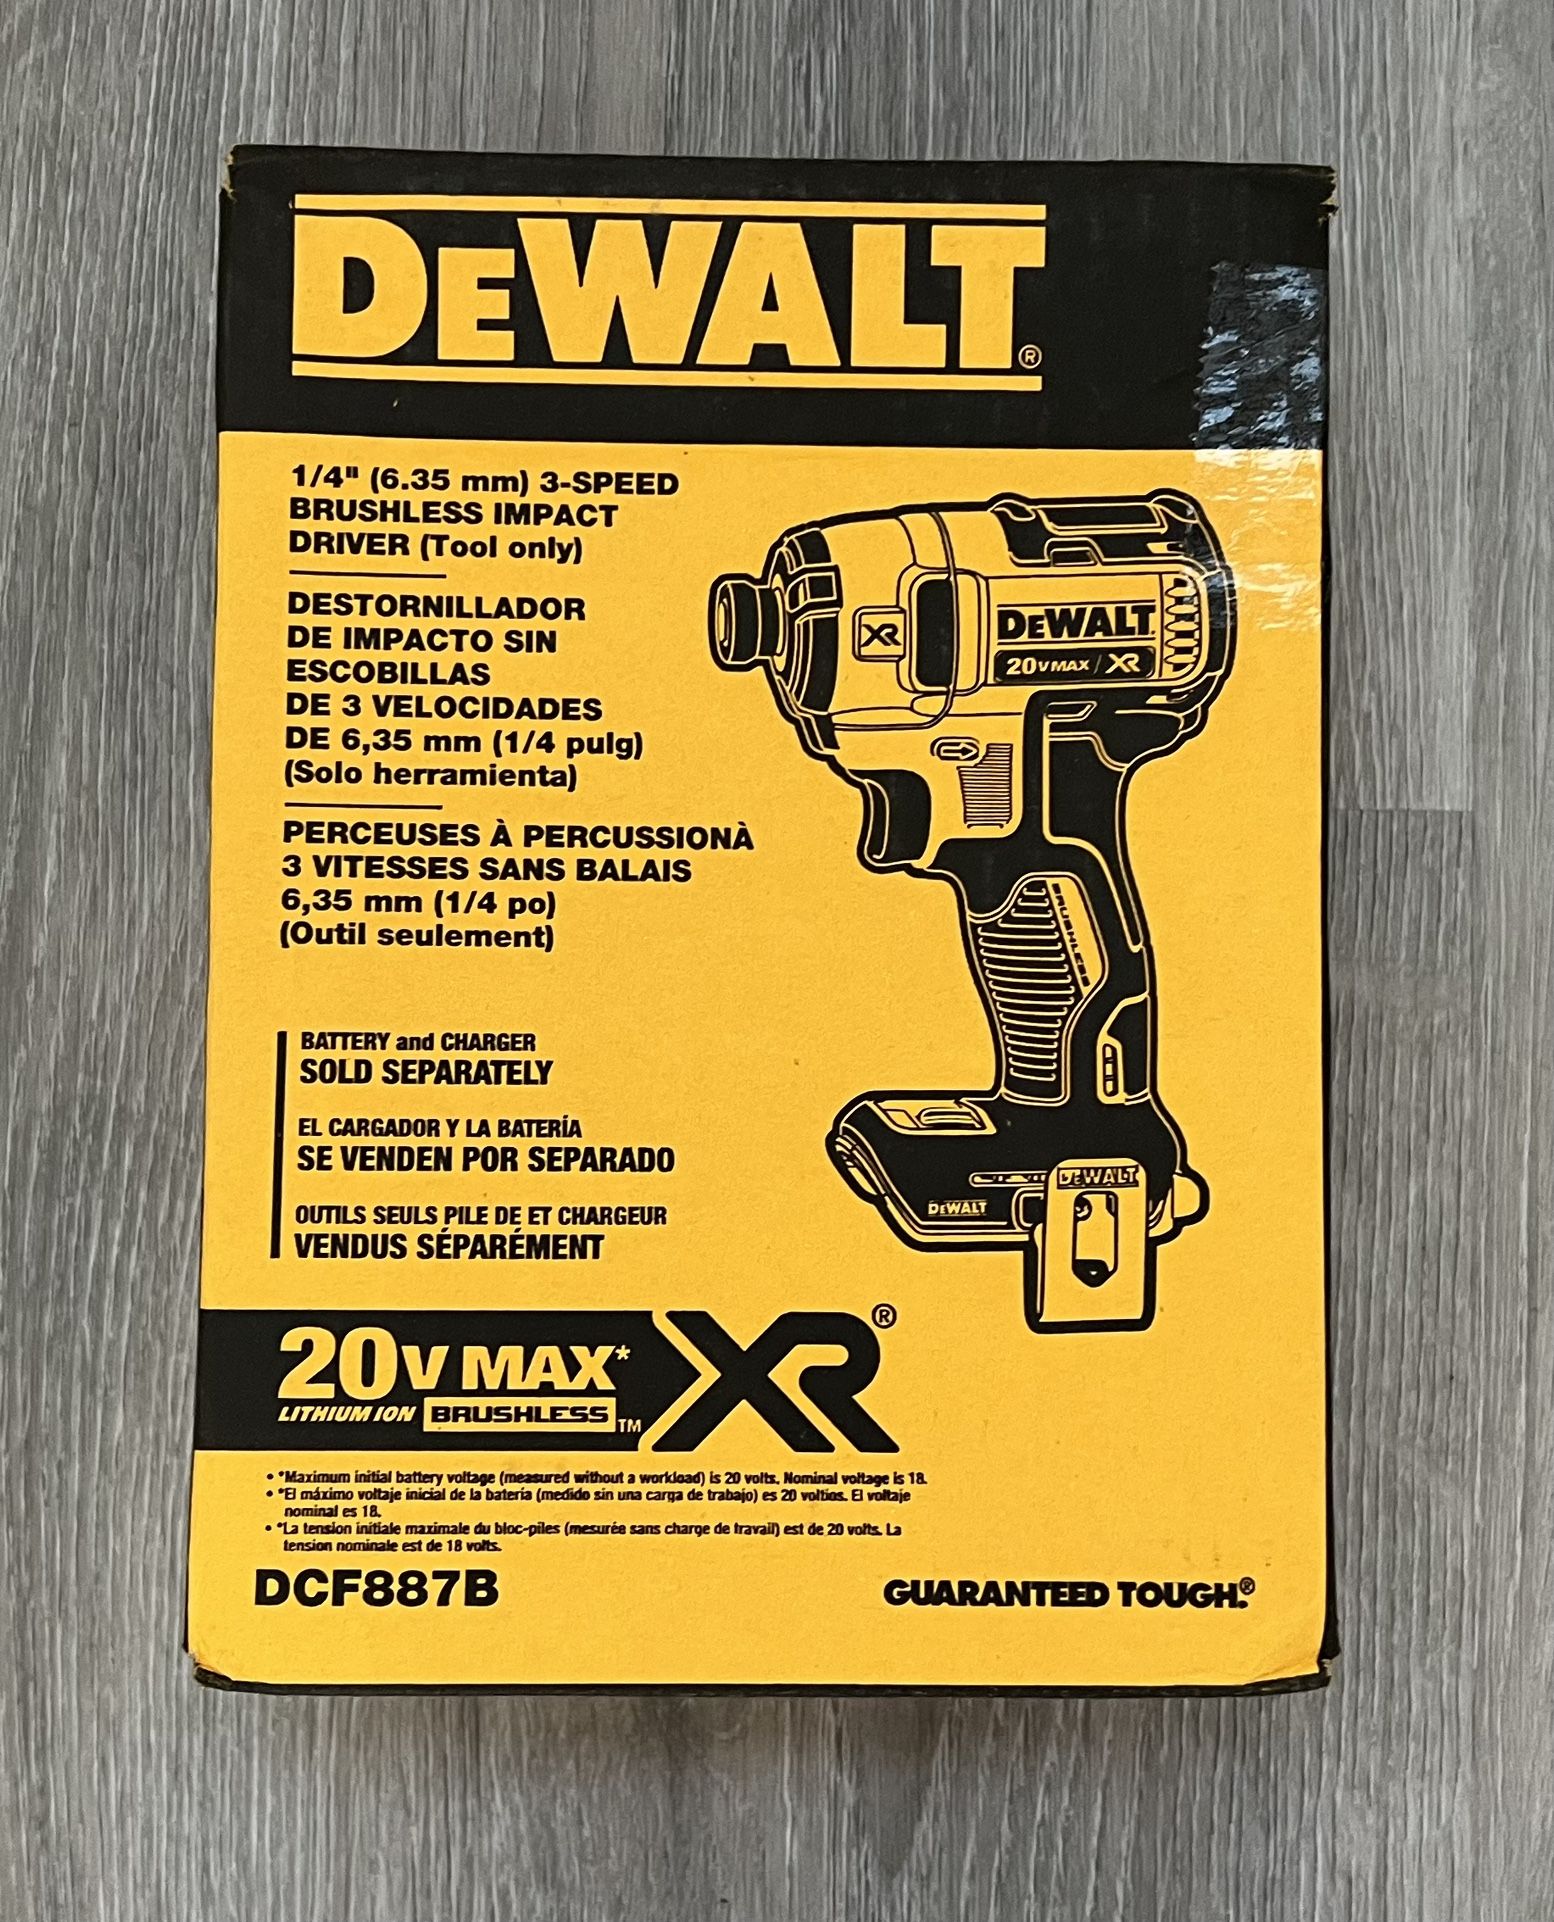 New in-box DeWalt DCF887B 20V MAX* XR® 3-Speed 1/4 in. Impact Driver (tool only) 